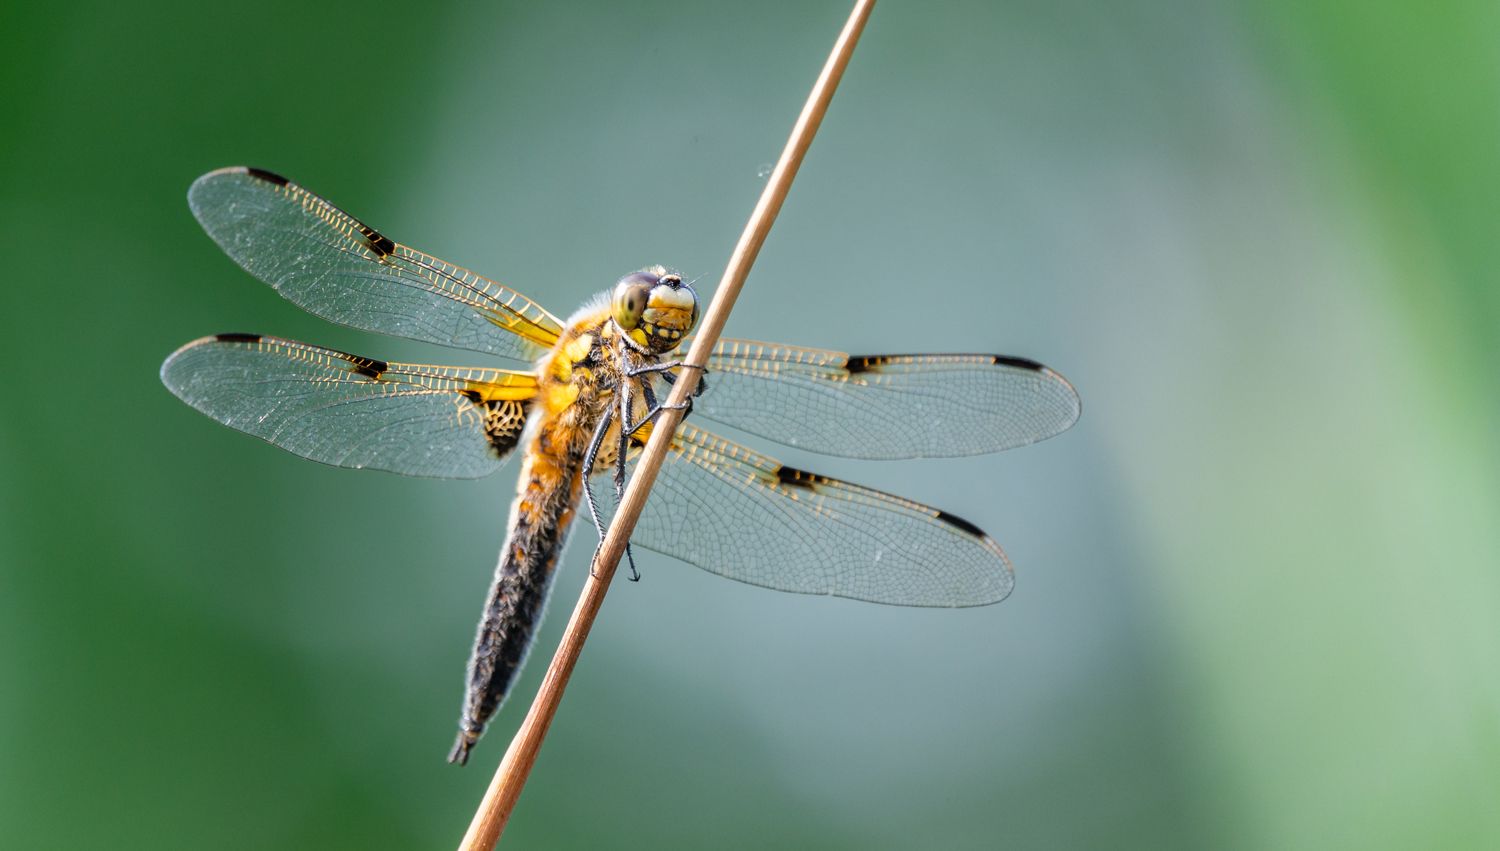 Four-spotted chaser dragonfly (Libellula quadrimaculata)